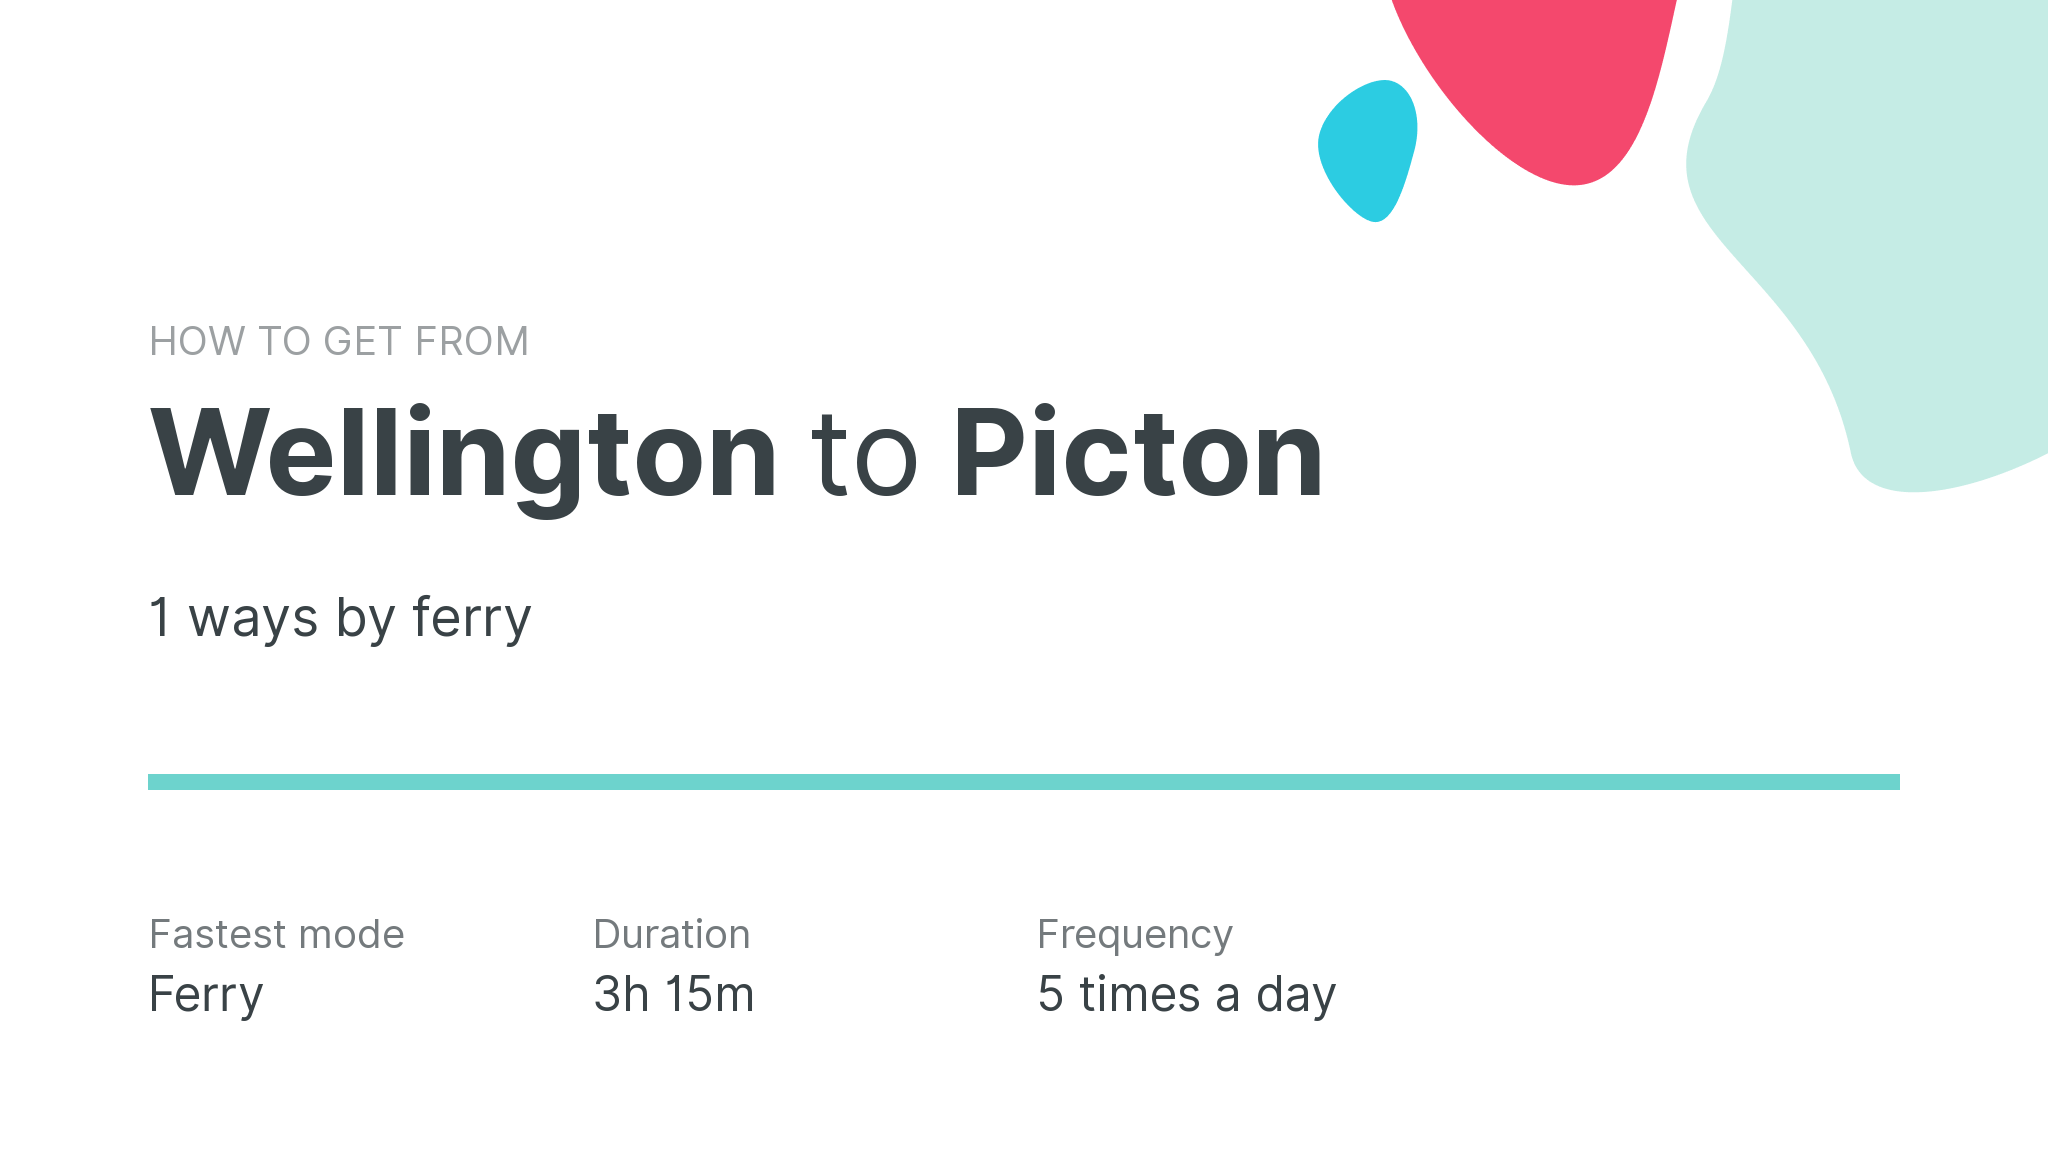 How do I get from Wellington to Picton